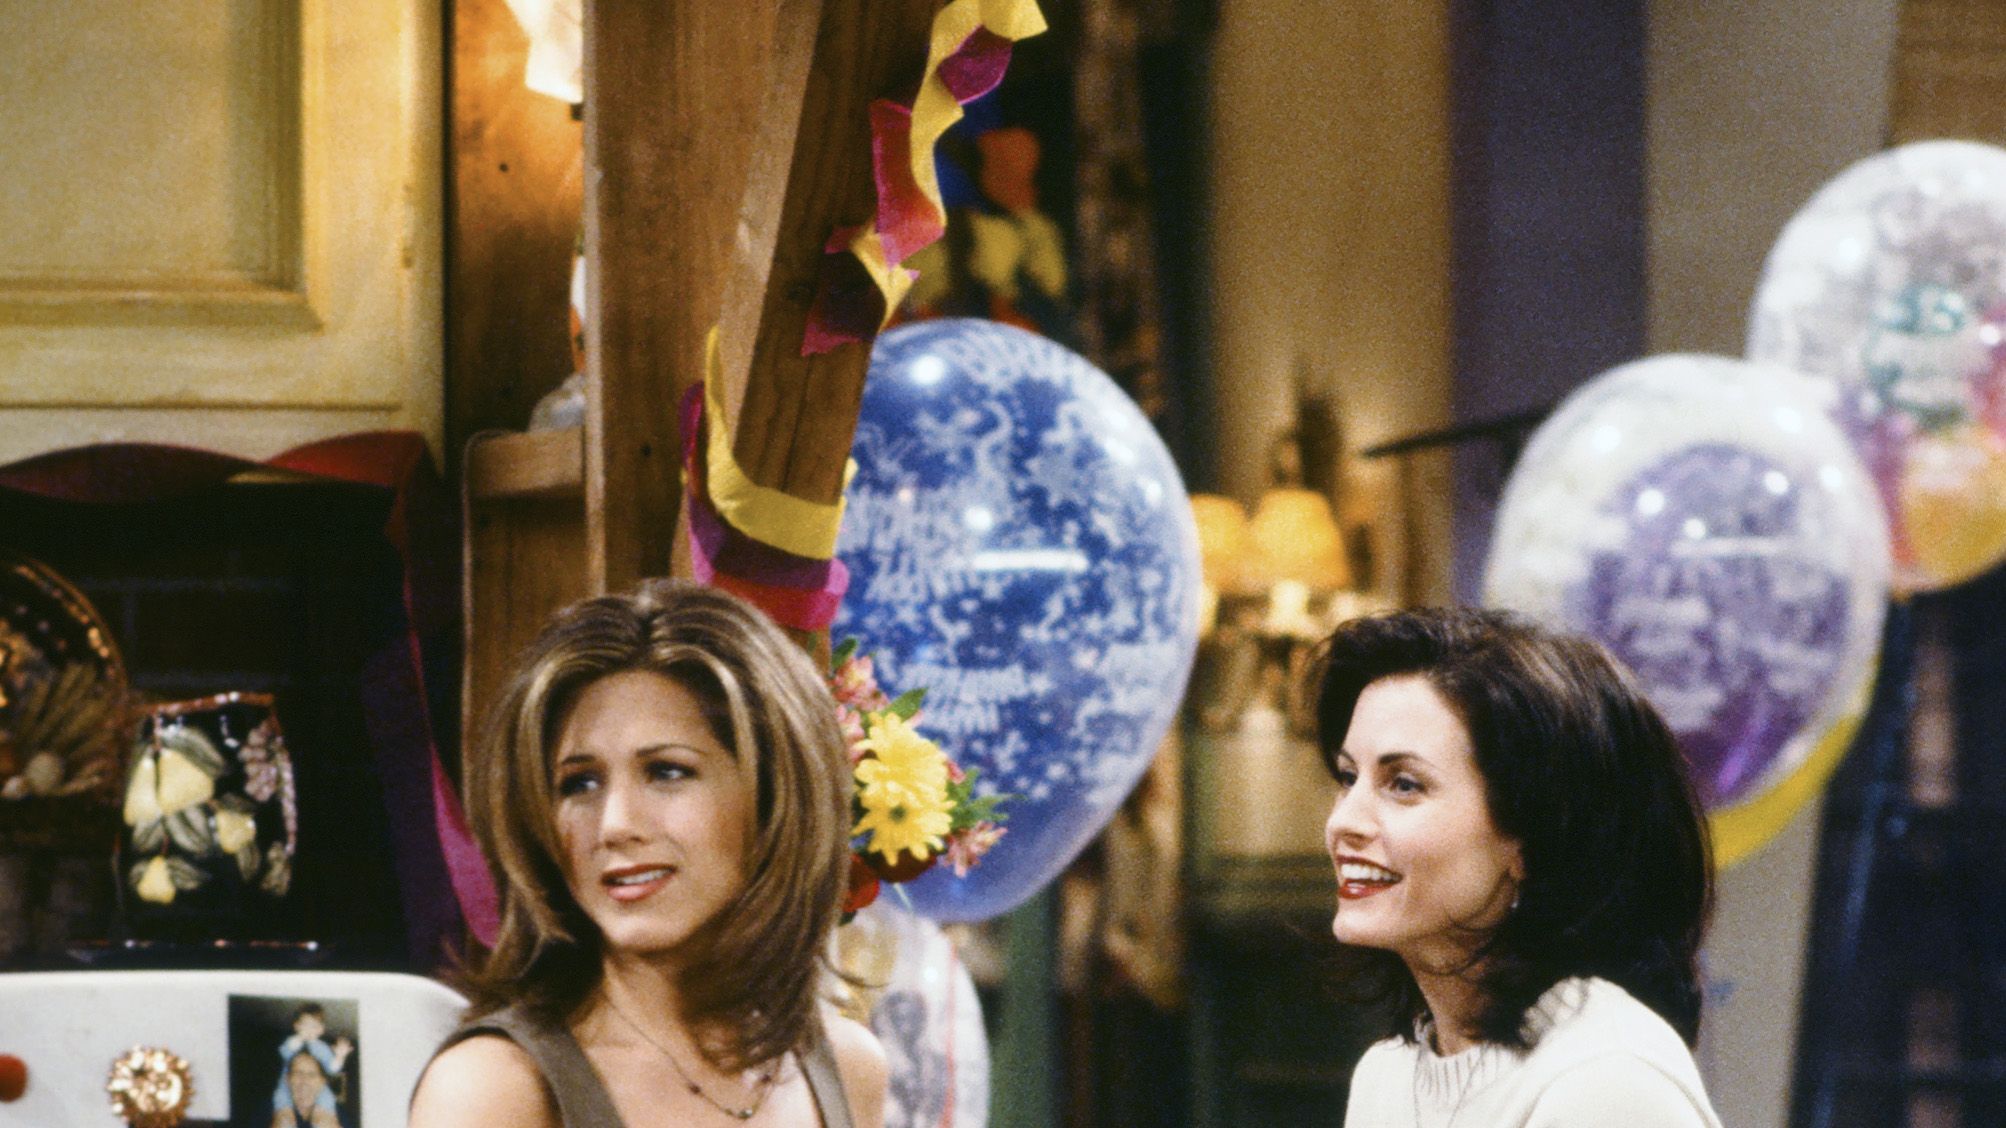 Friends swapped Jennifer Aniston for one episode and no one